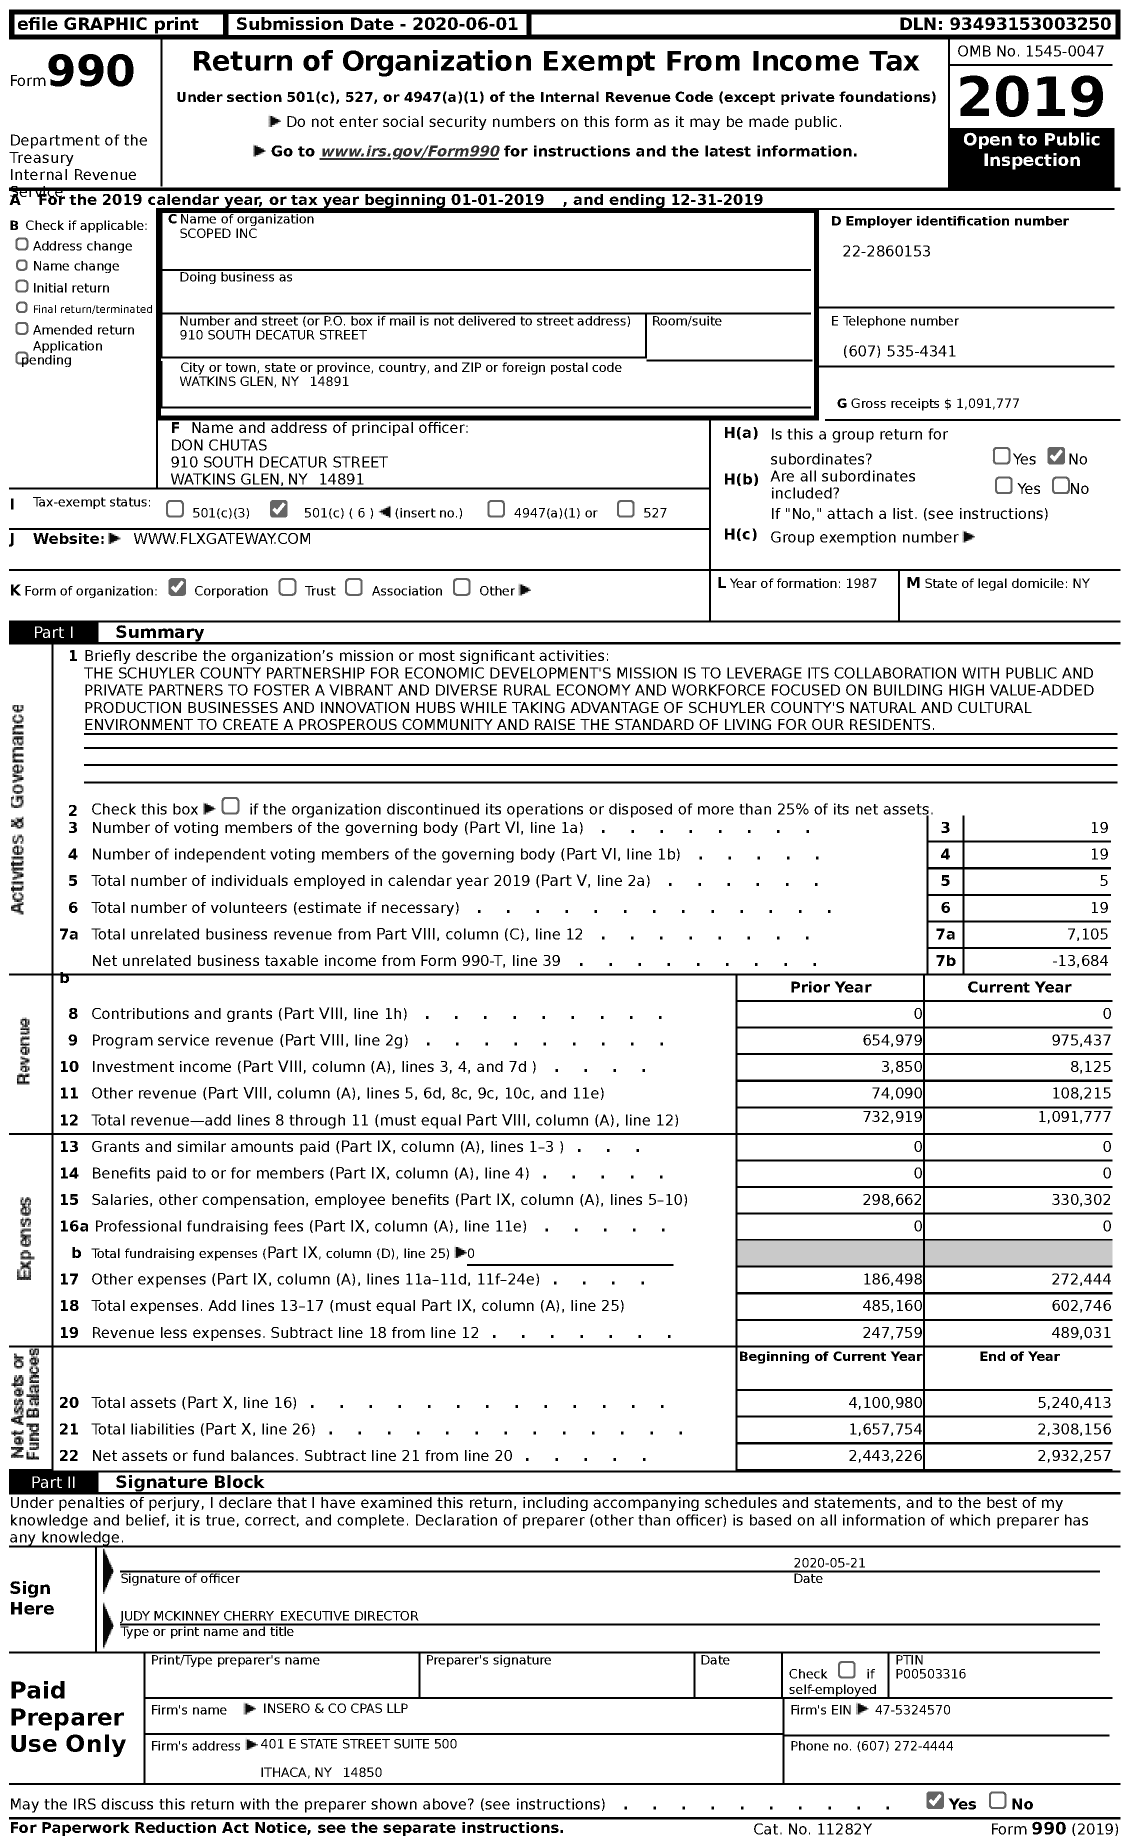 Image of first page of 2019 Form 990 for Scoped